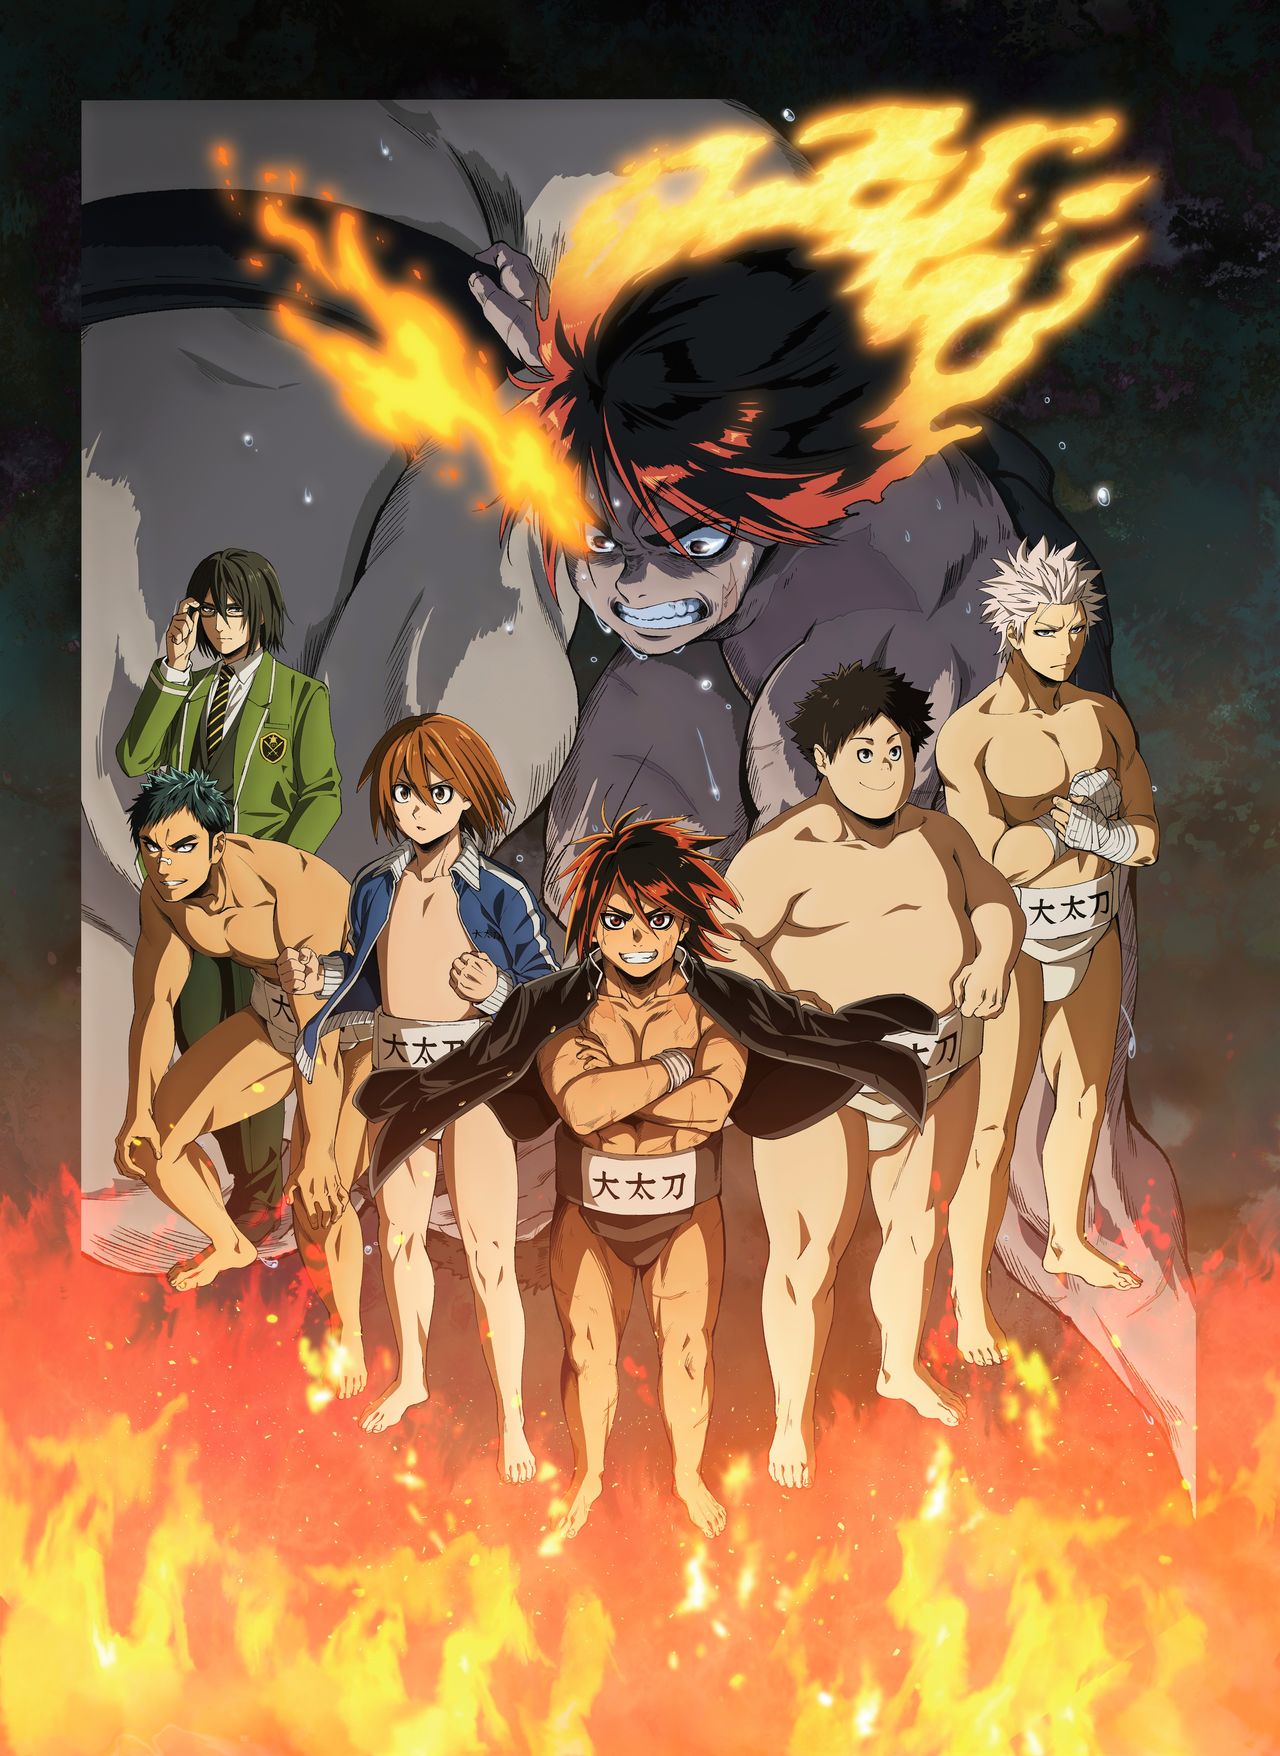 The television anime adaption of the series debuted in October 2018 and depicts how Hinomaru reaches the pinnacle of high school sumō. (© Kawada/Shūeisha Hinomaru Sumō Production Committee)